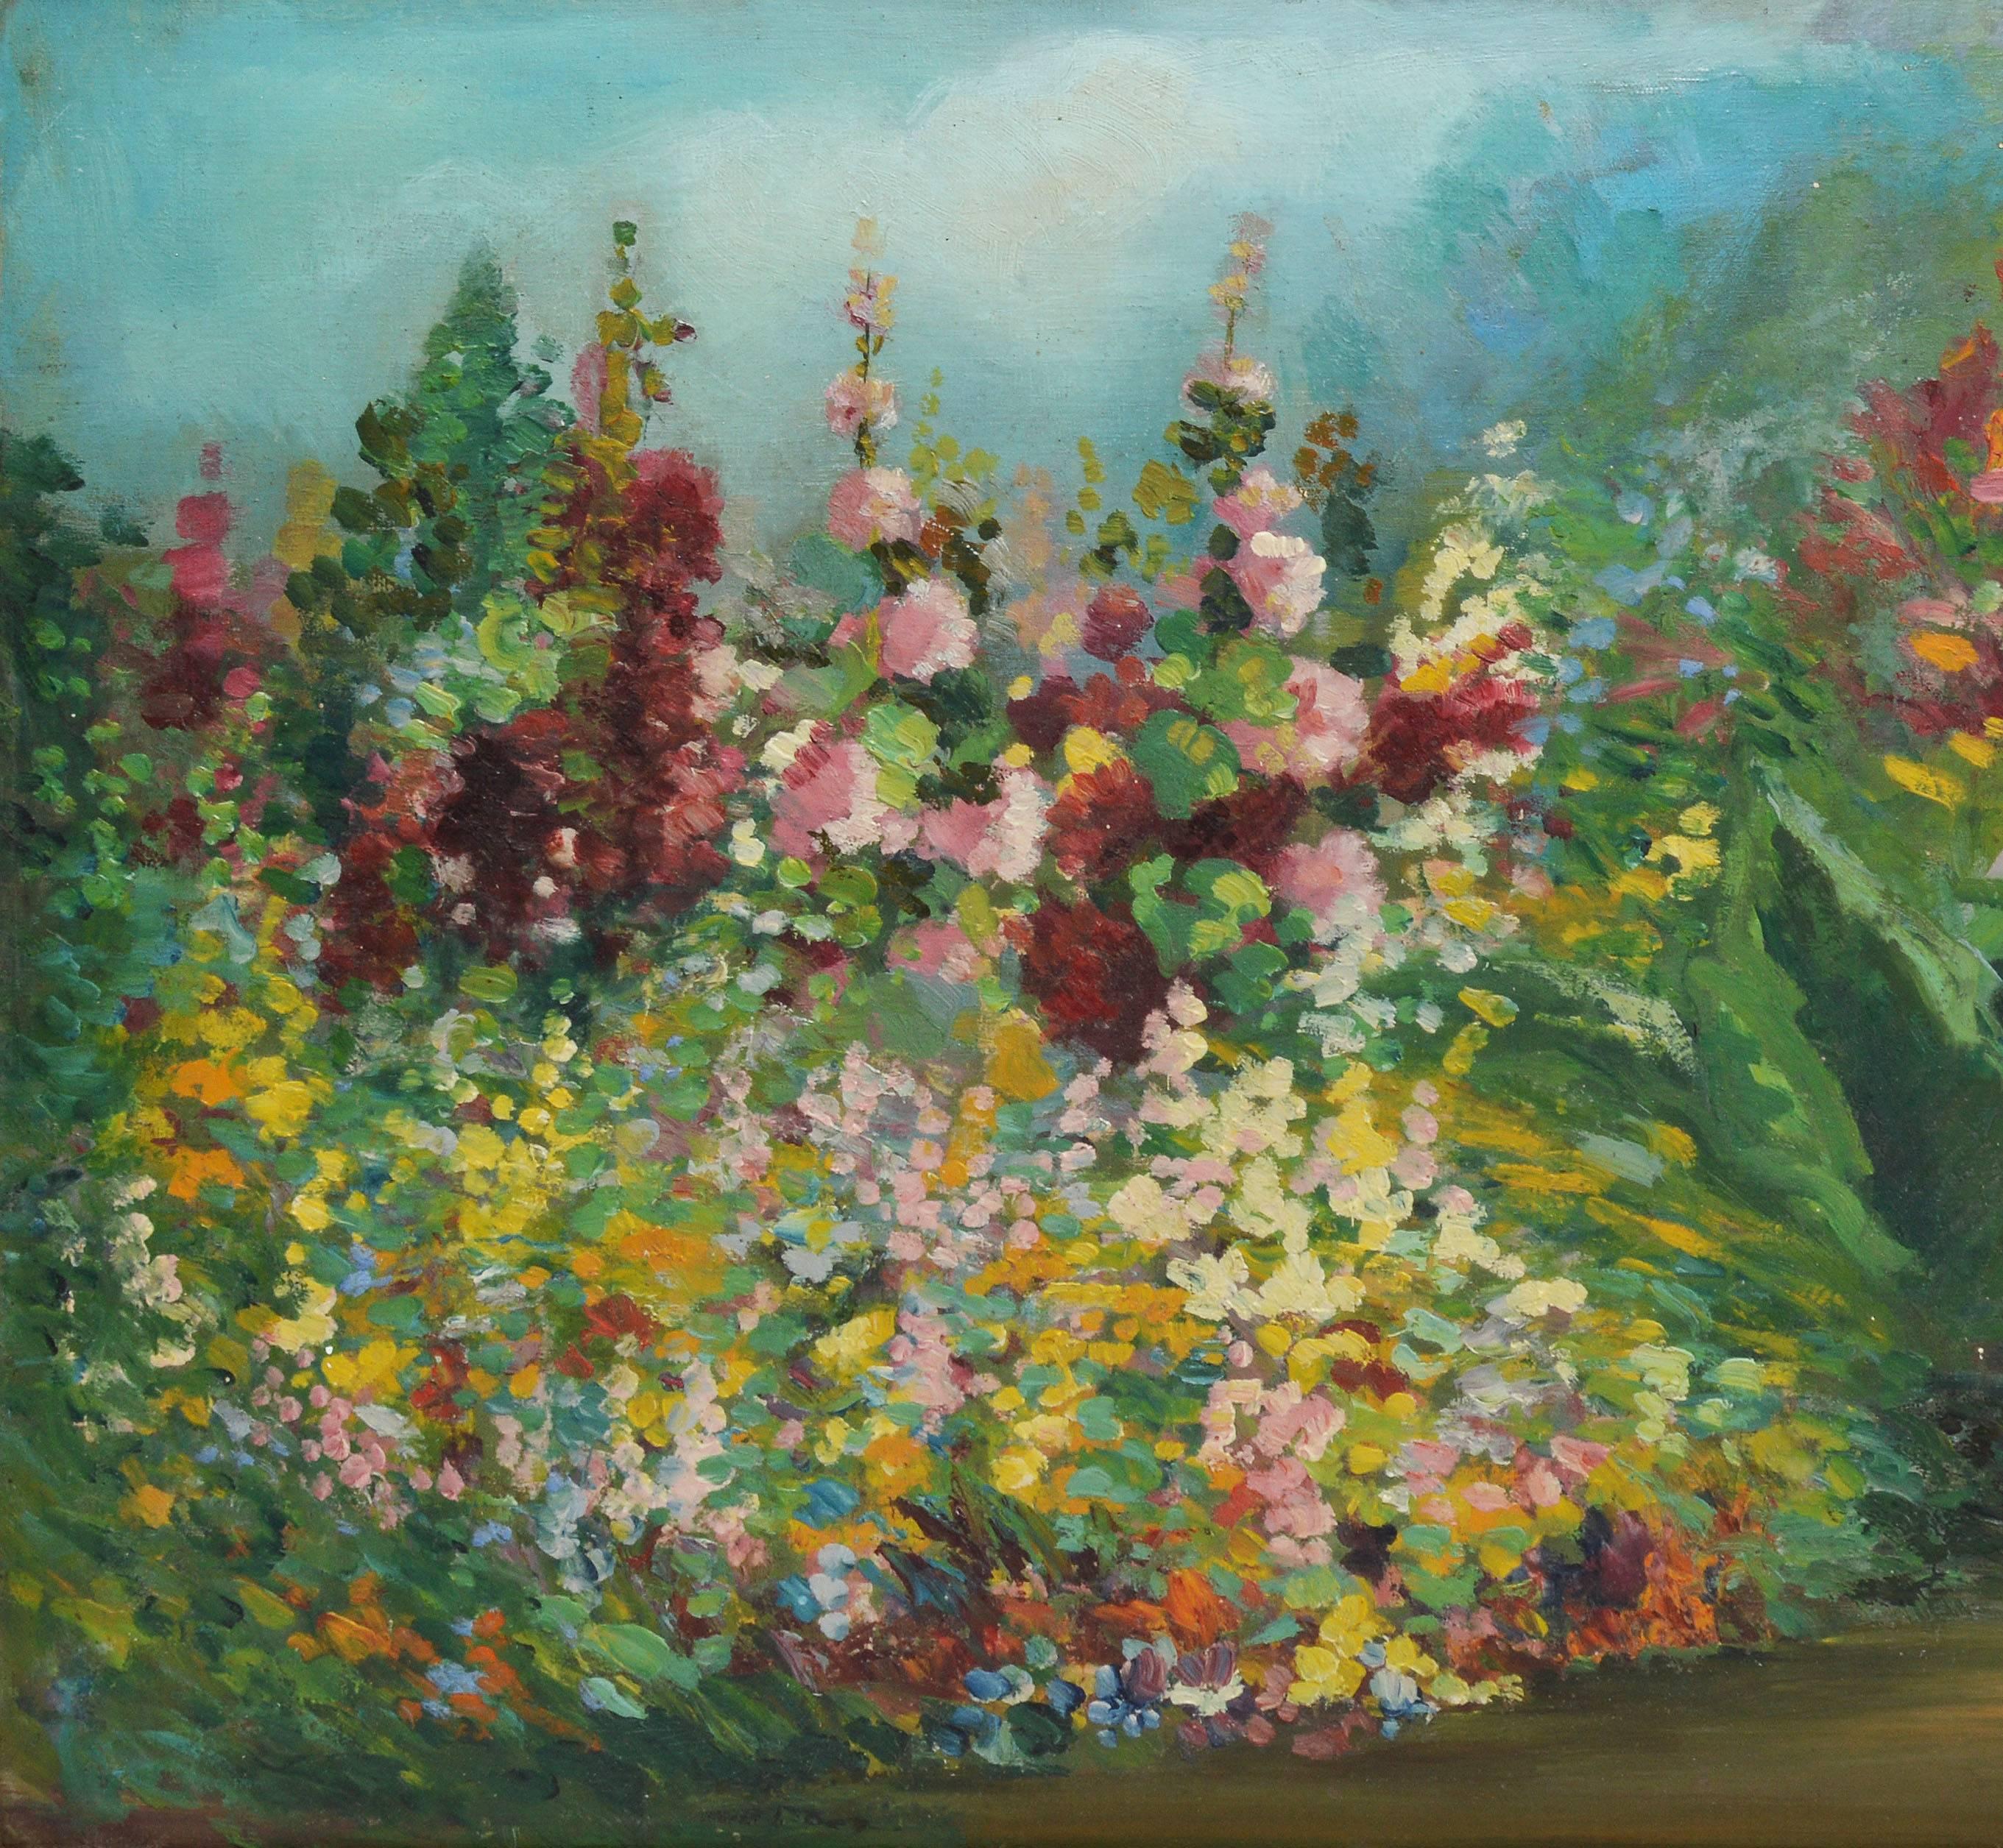 Impressionist view of a landscape with blooming wild flowers. Oil on board, circa 1910. Signed lower right illegibly. Displayed in a giltwood frame. Image size, 20